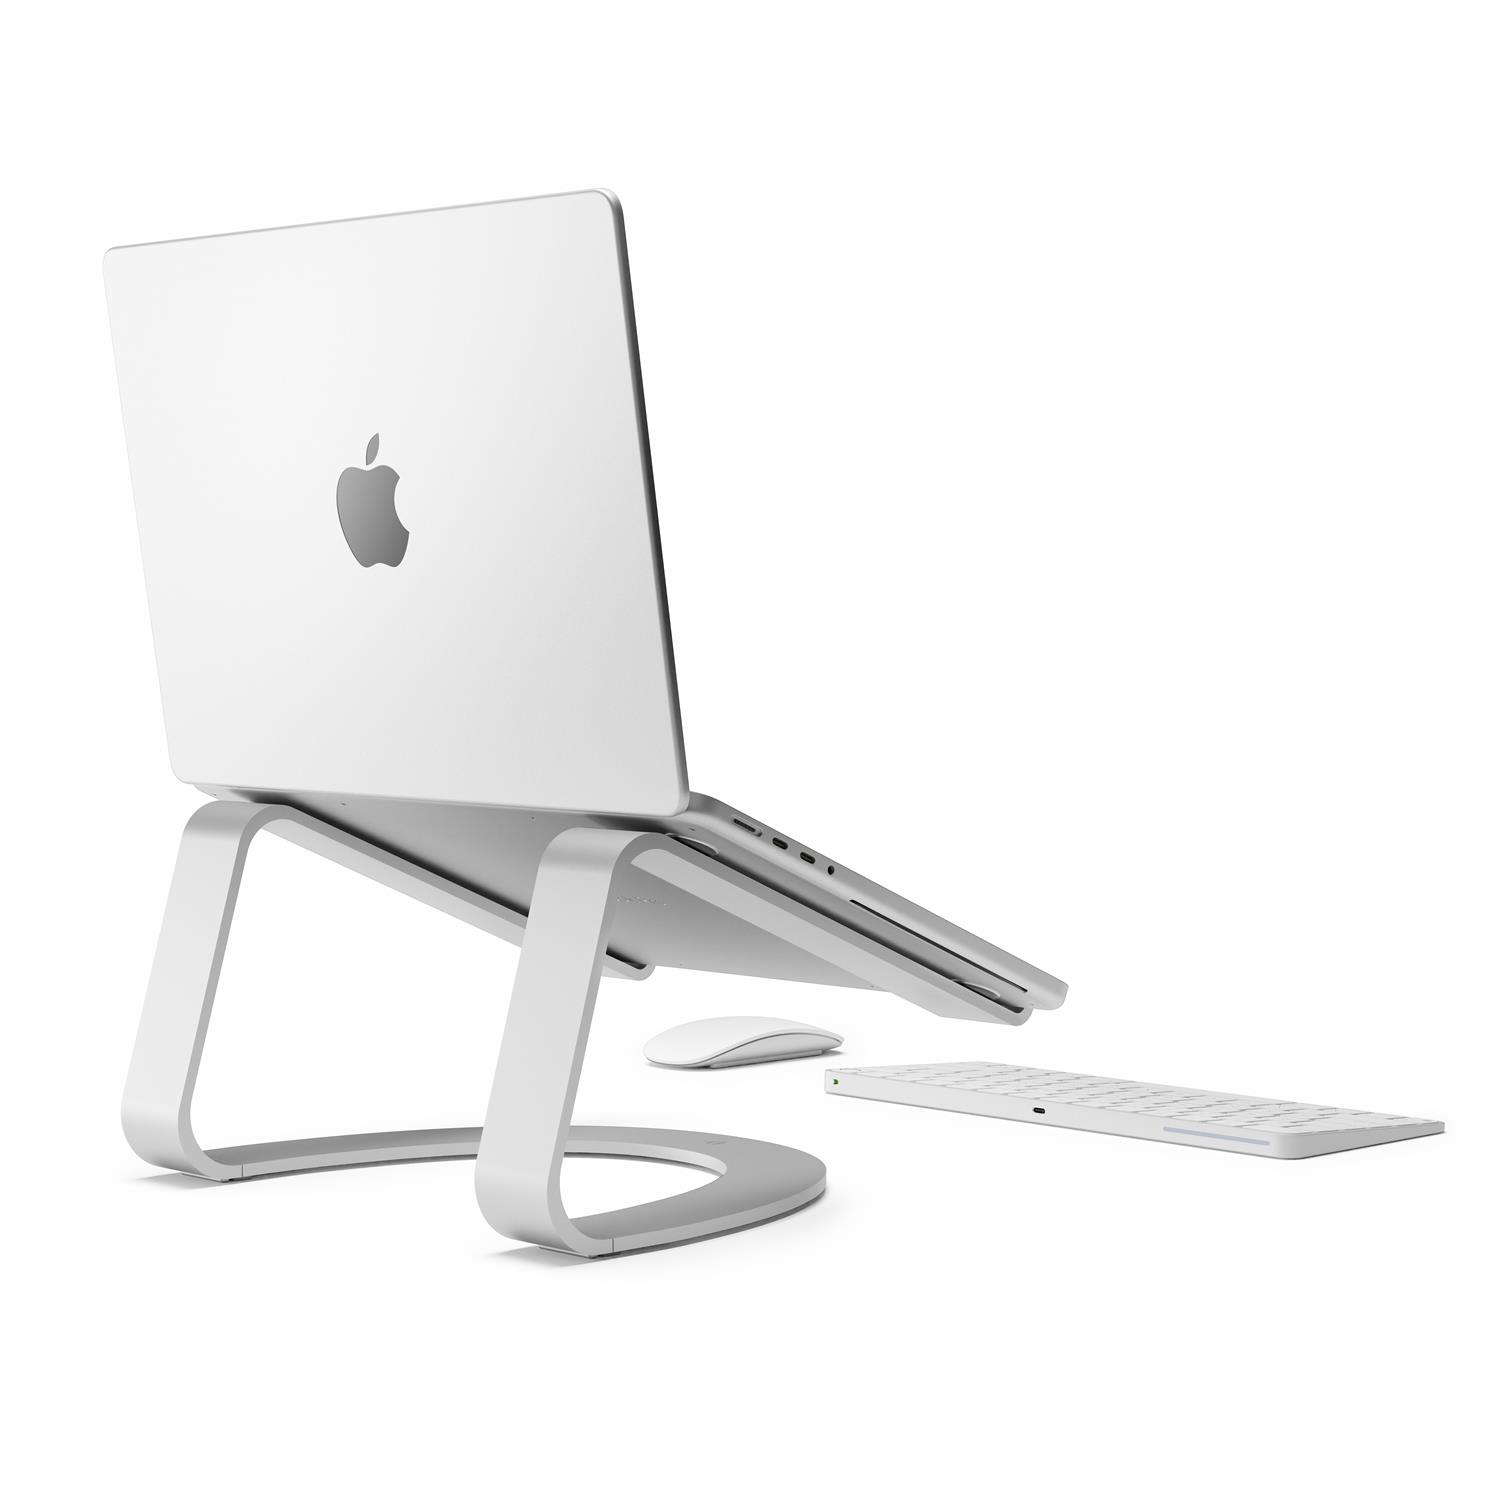 Twelve South Curve SE Aluminum Stand for MacBook, Notebooks - Silver